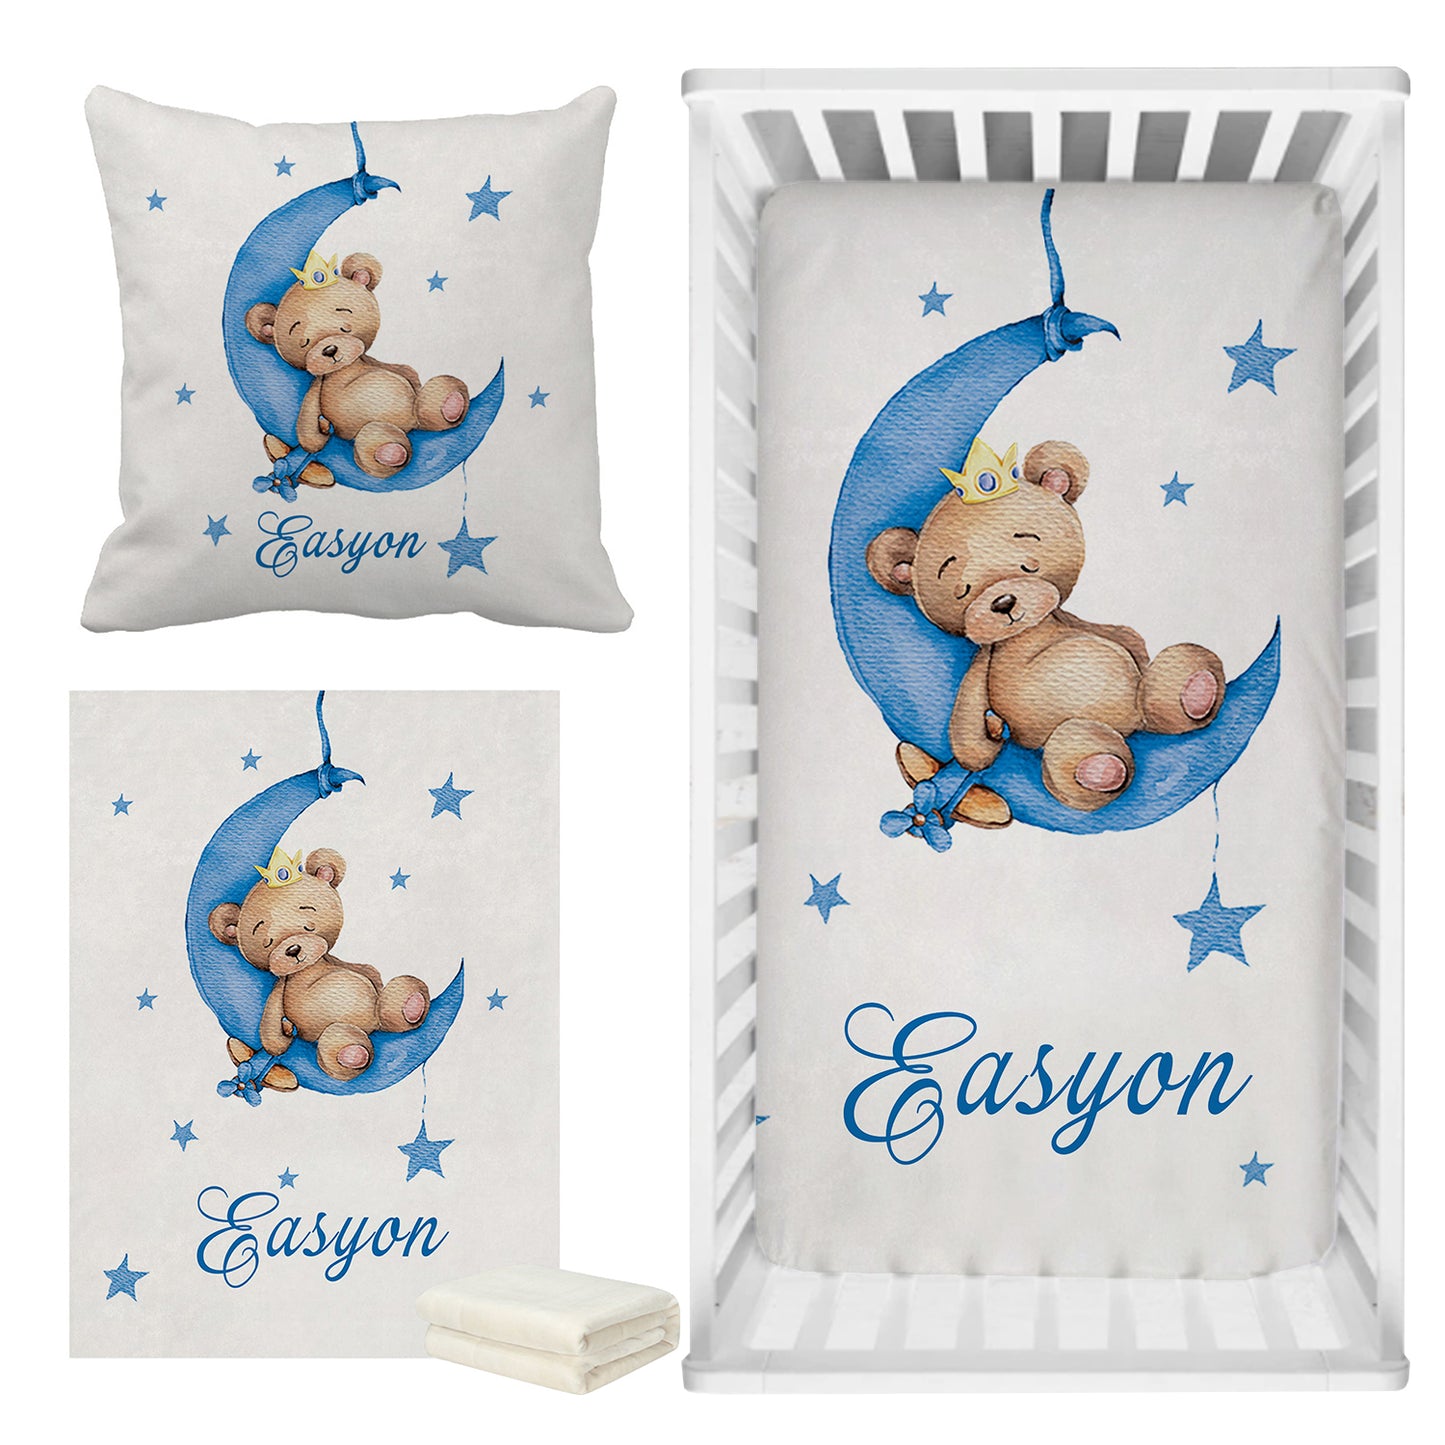 Personalized Baby Bedding Set | Bamboo Fitted Sheet, Pillow Cover & Fleece Blanket